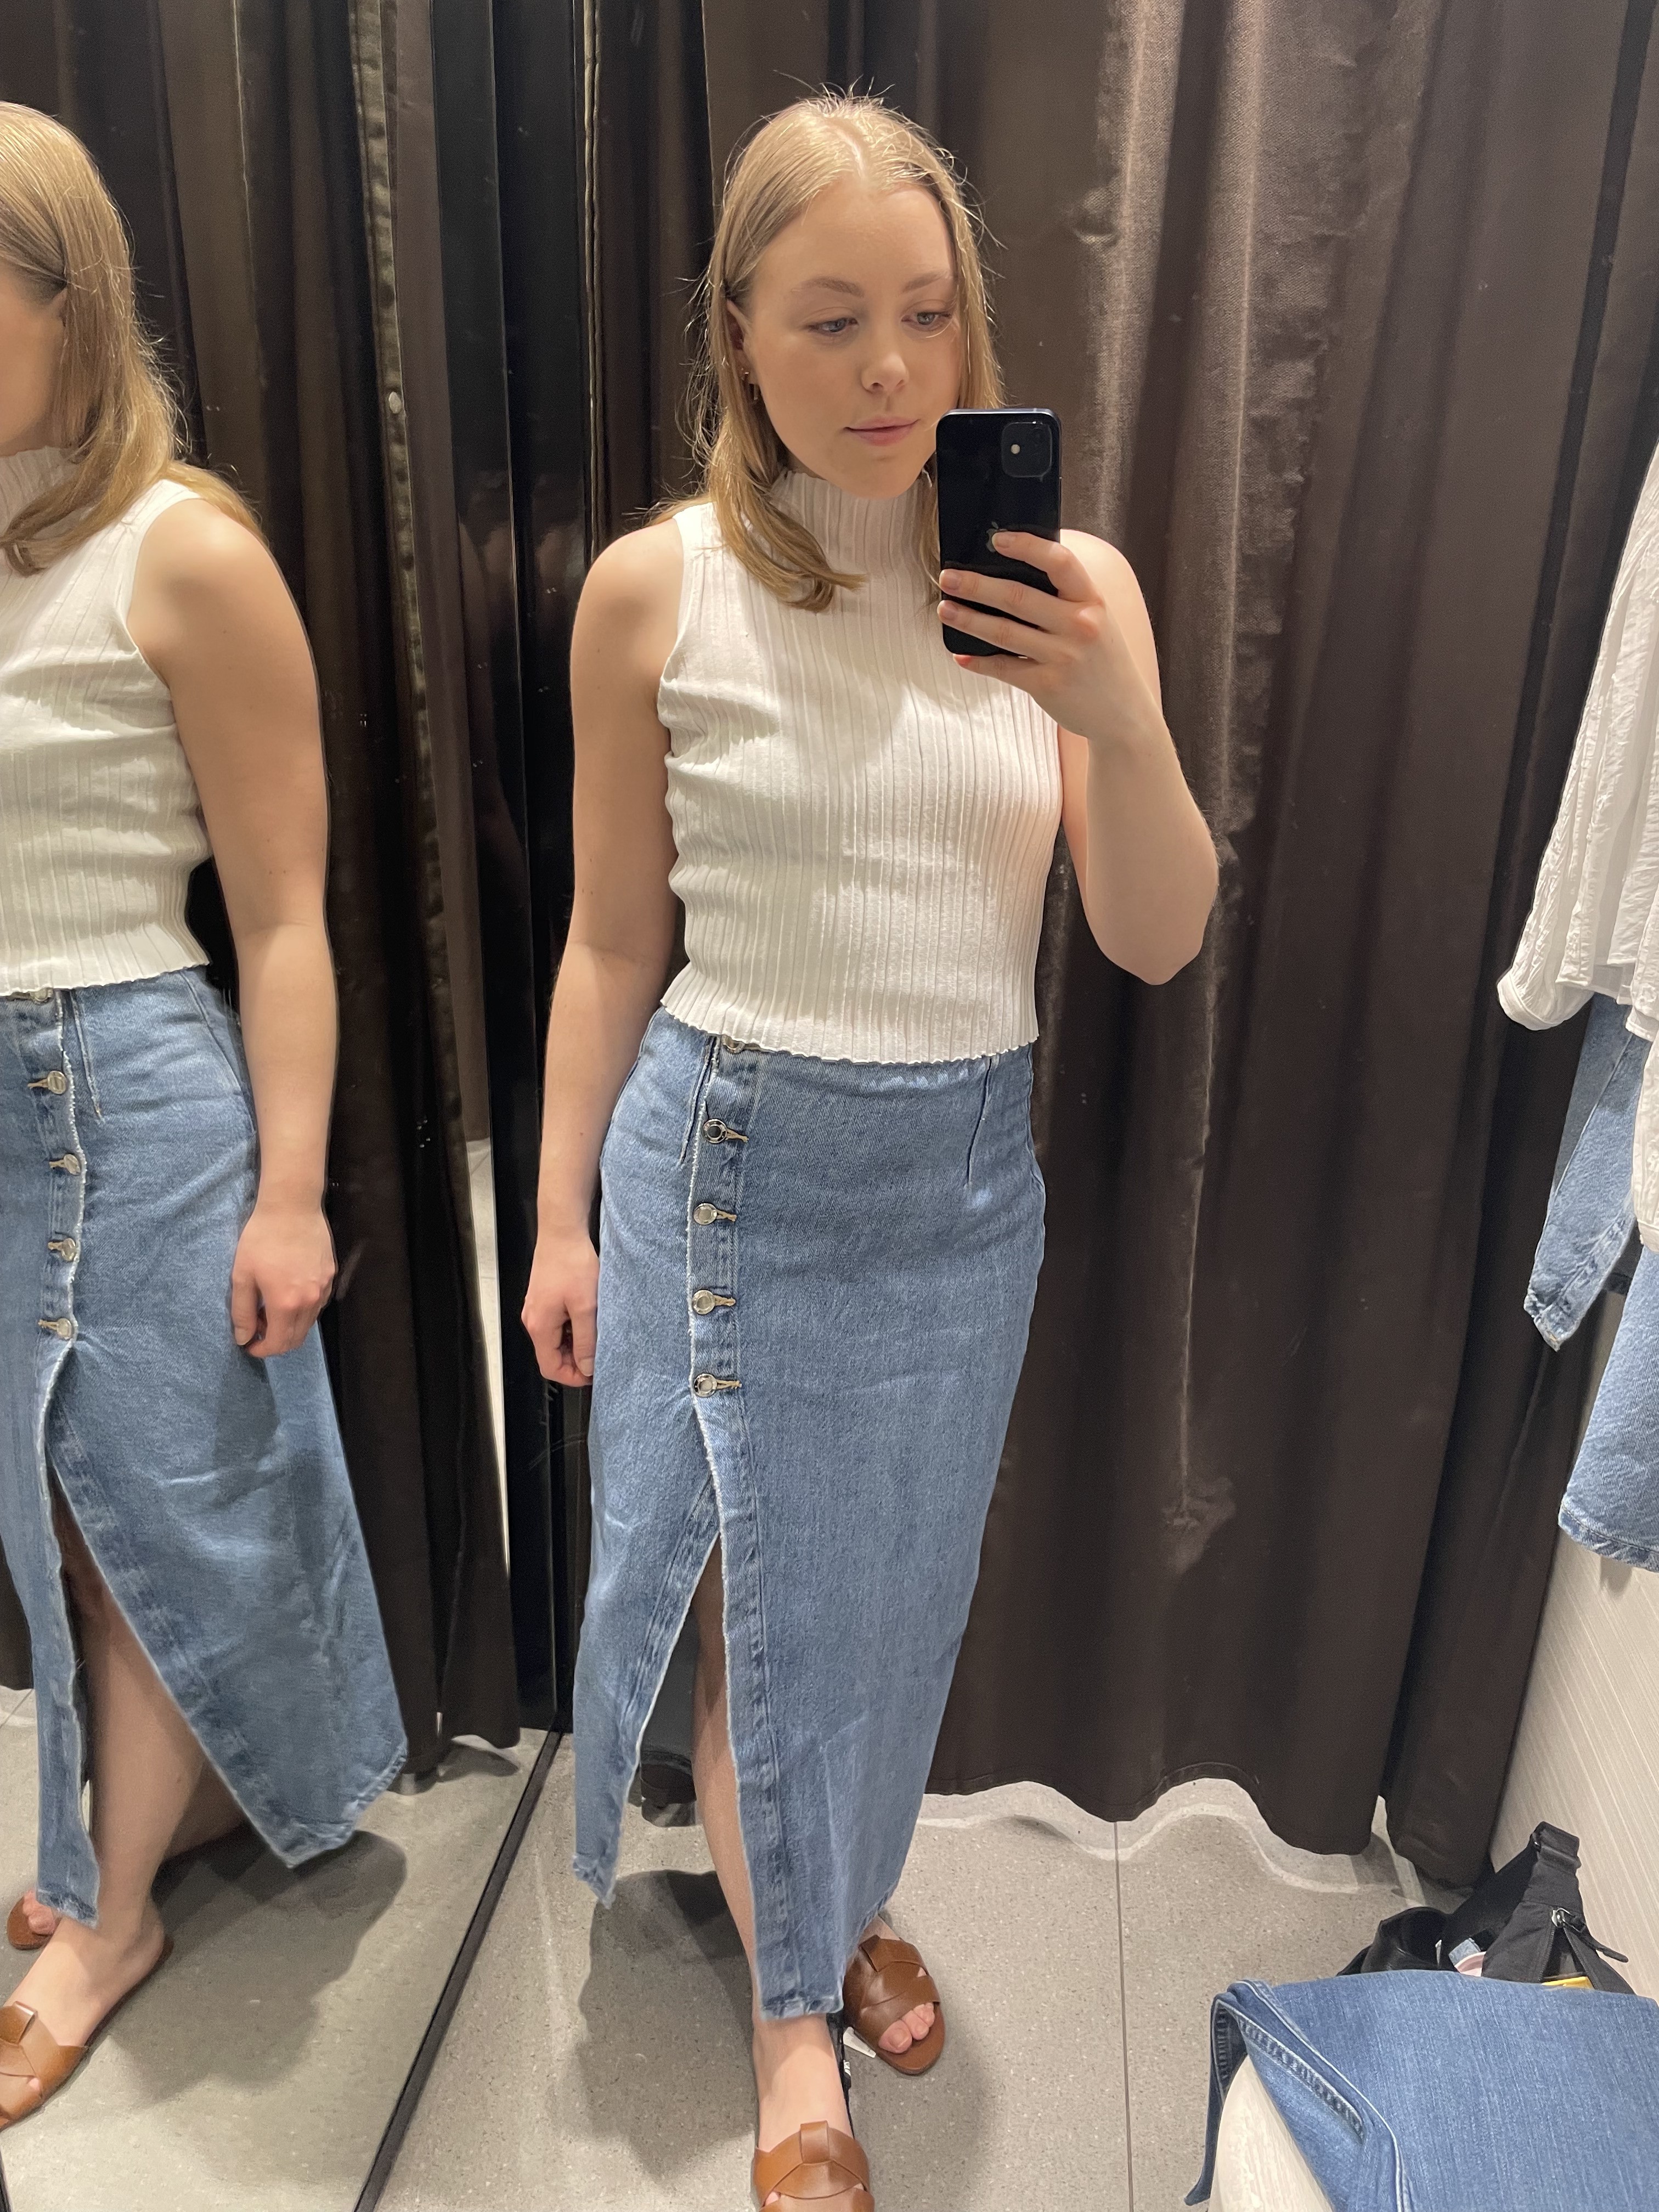 Woman in dressing room wears white top, denim skirt and brown sandals